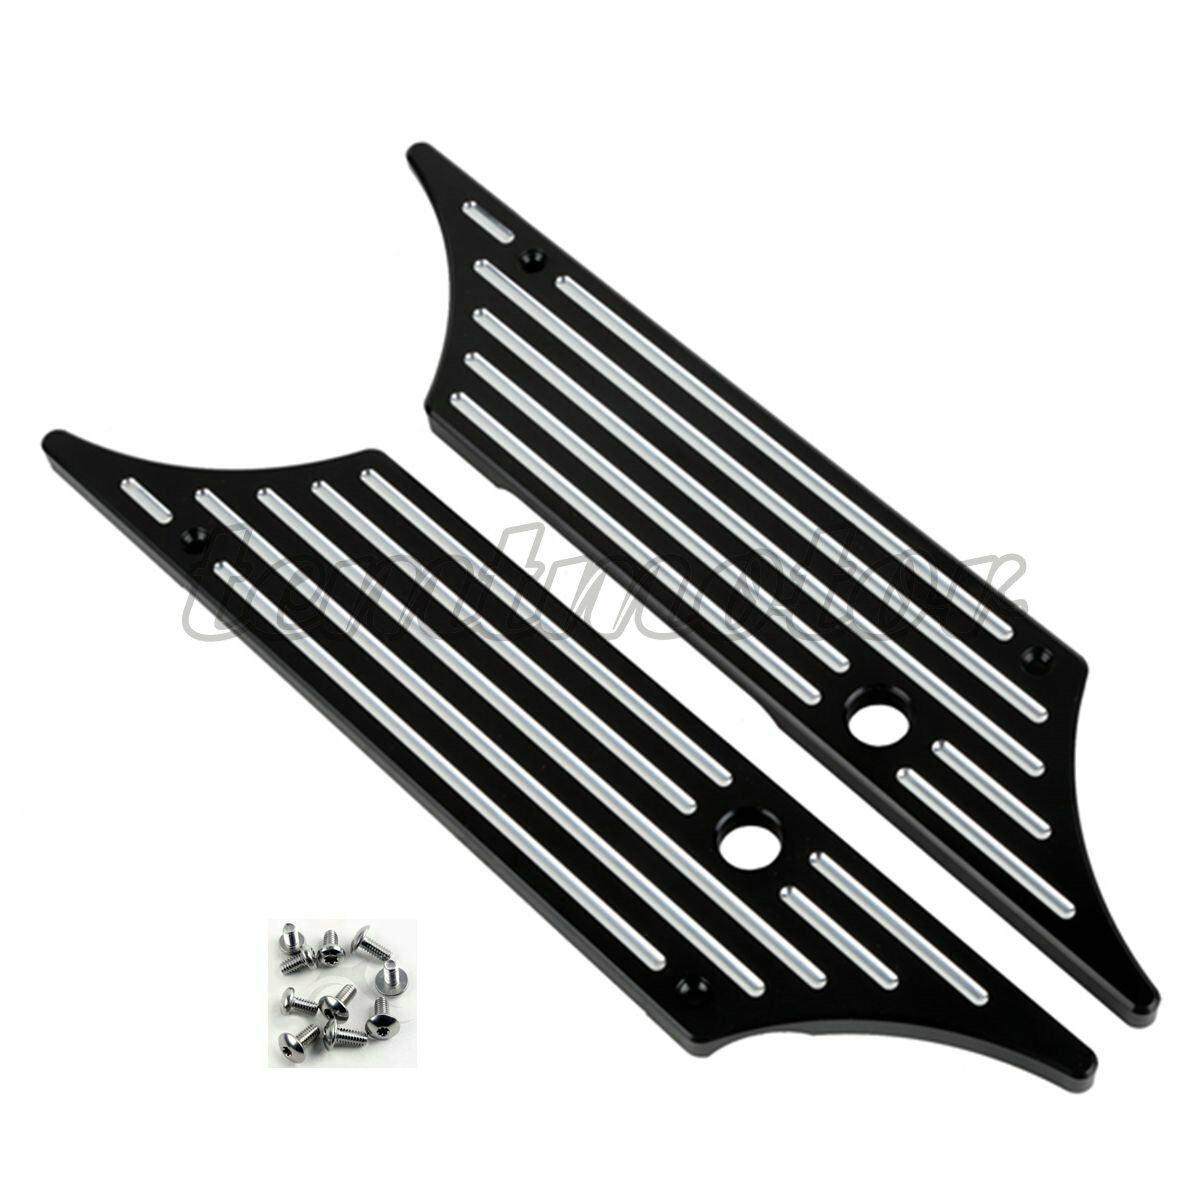 Black Hard Saddlebag Latch Cover For Harley Road King Street Electra Glide 93-13 - Moto Life Products